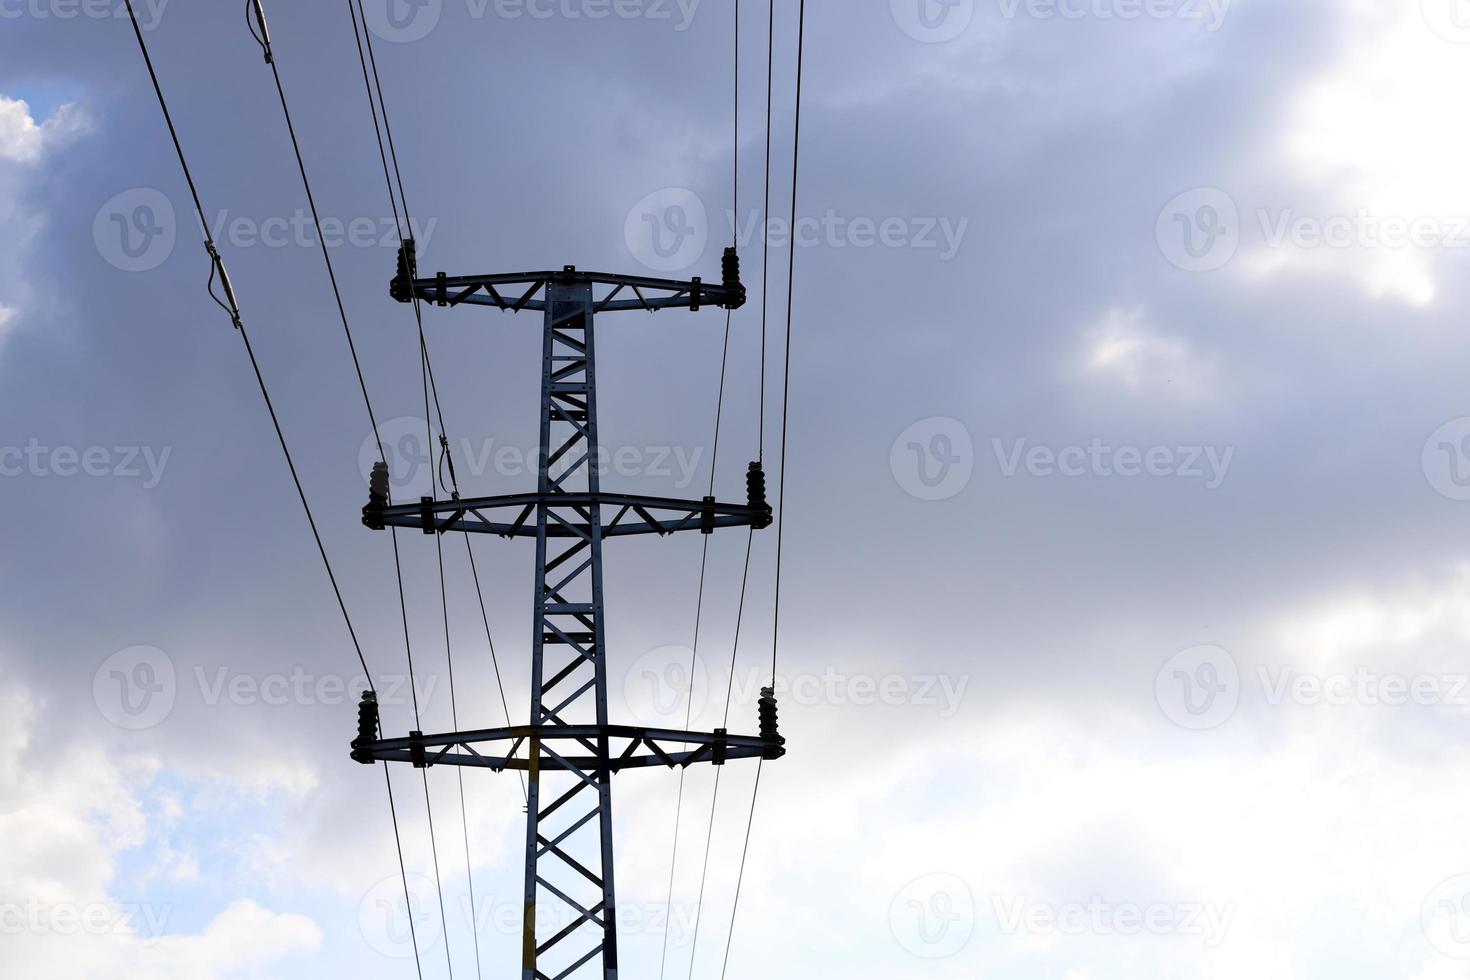 Electrical wires carrying high voltage current. photo